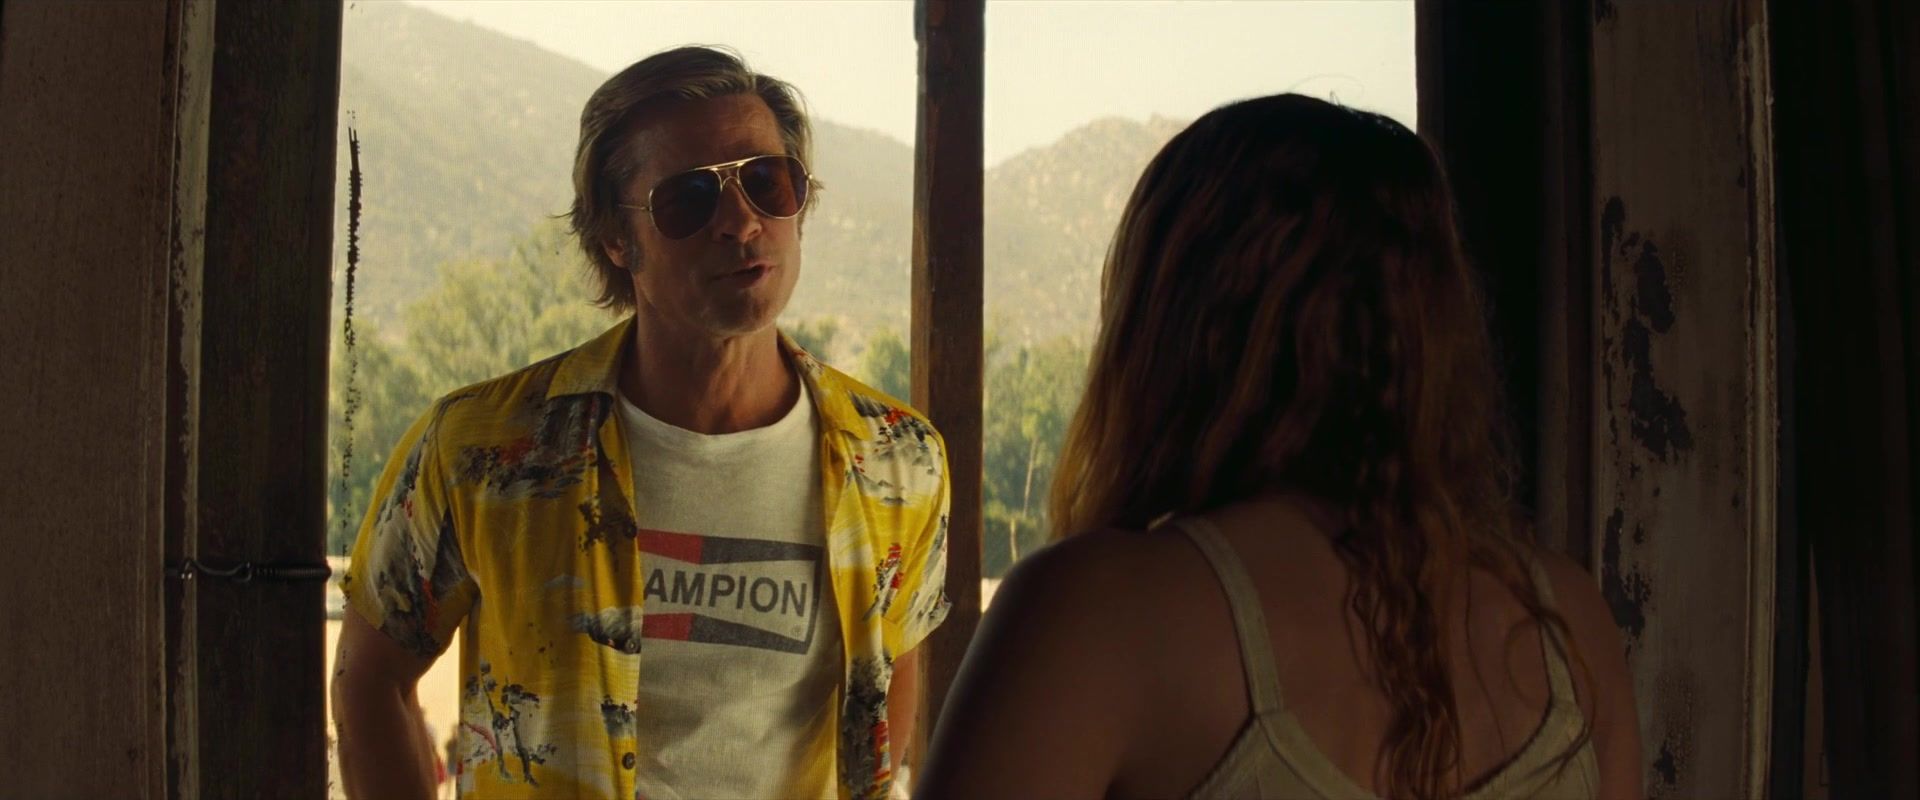 Tattoo Sexy Dakota Fanning, Margaret Qualley naked- Once Upon A Time In Hollywood (2019) White Girl